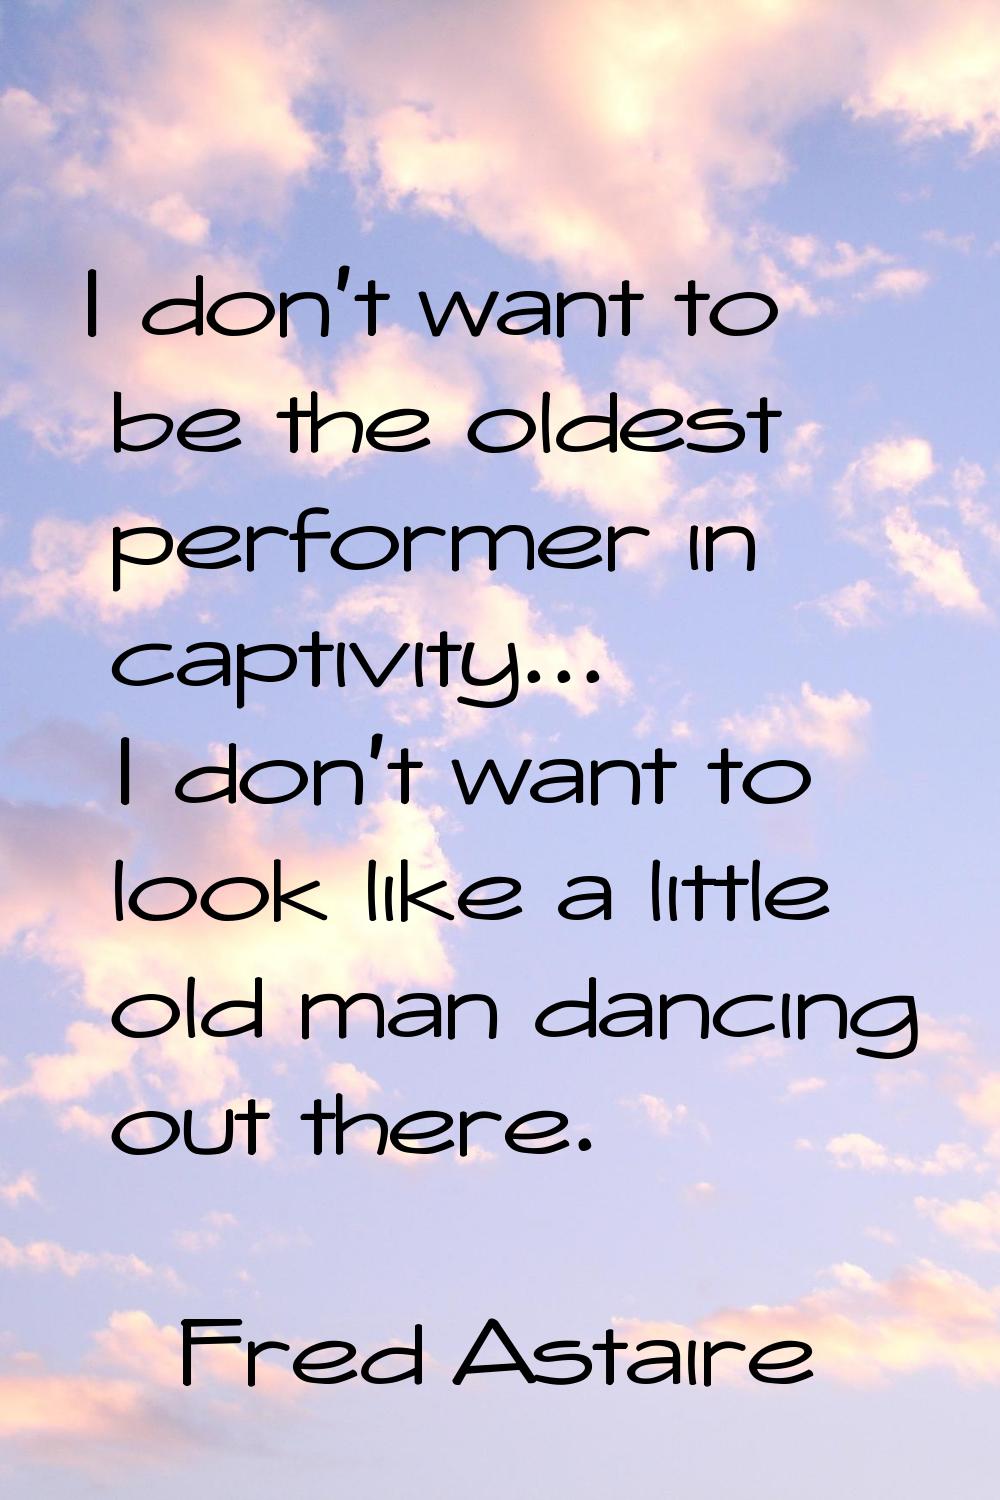 I don't want to be the oldest performer in captivity... I don't want to look like a little old man 